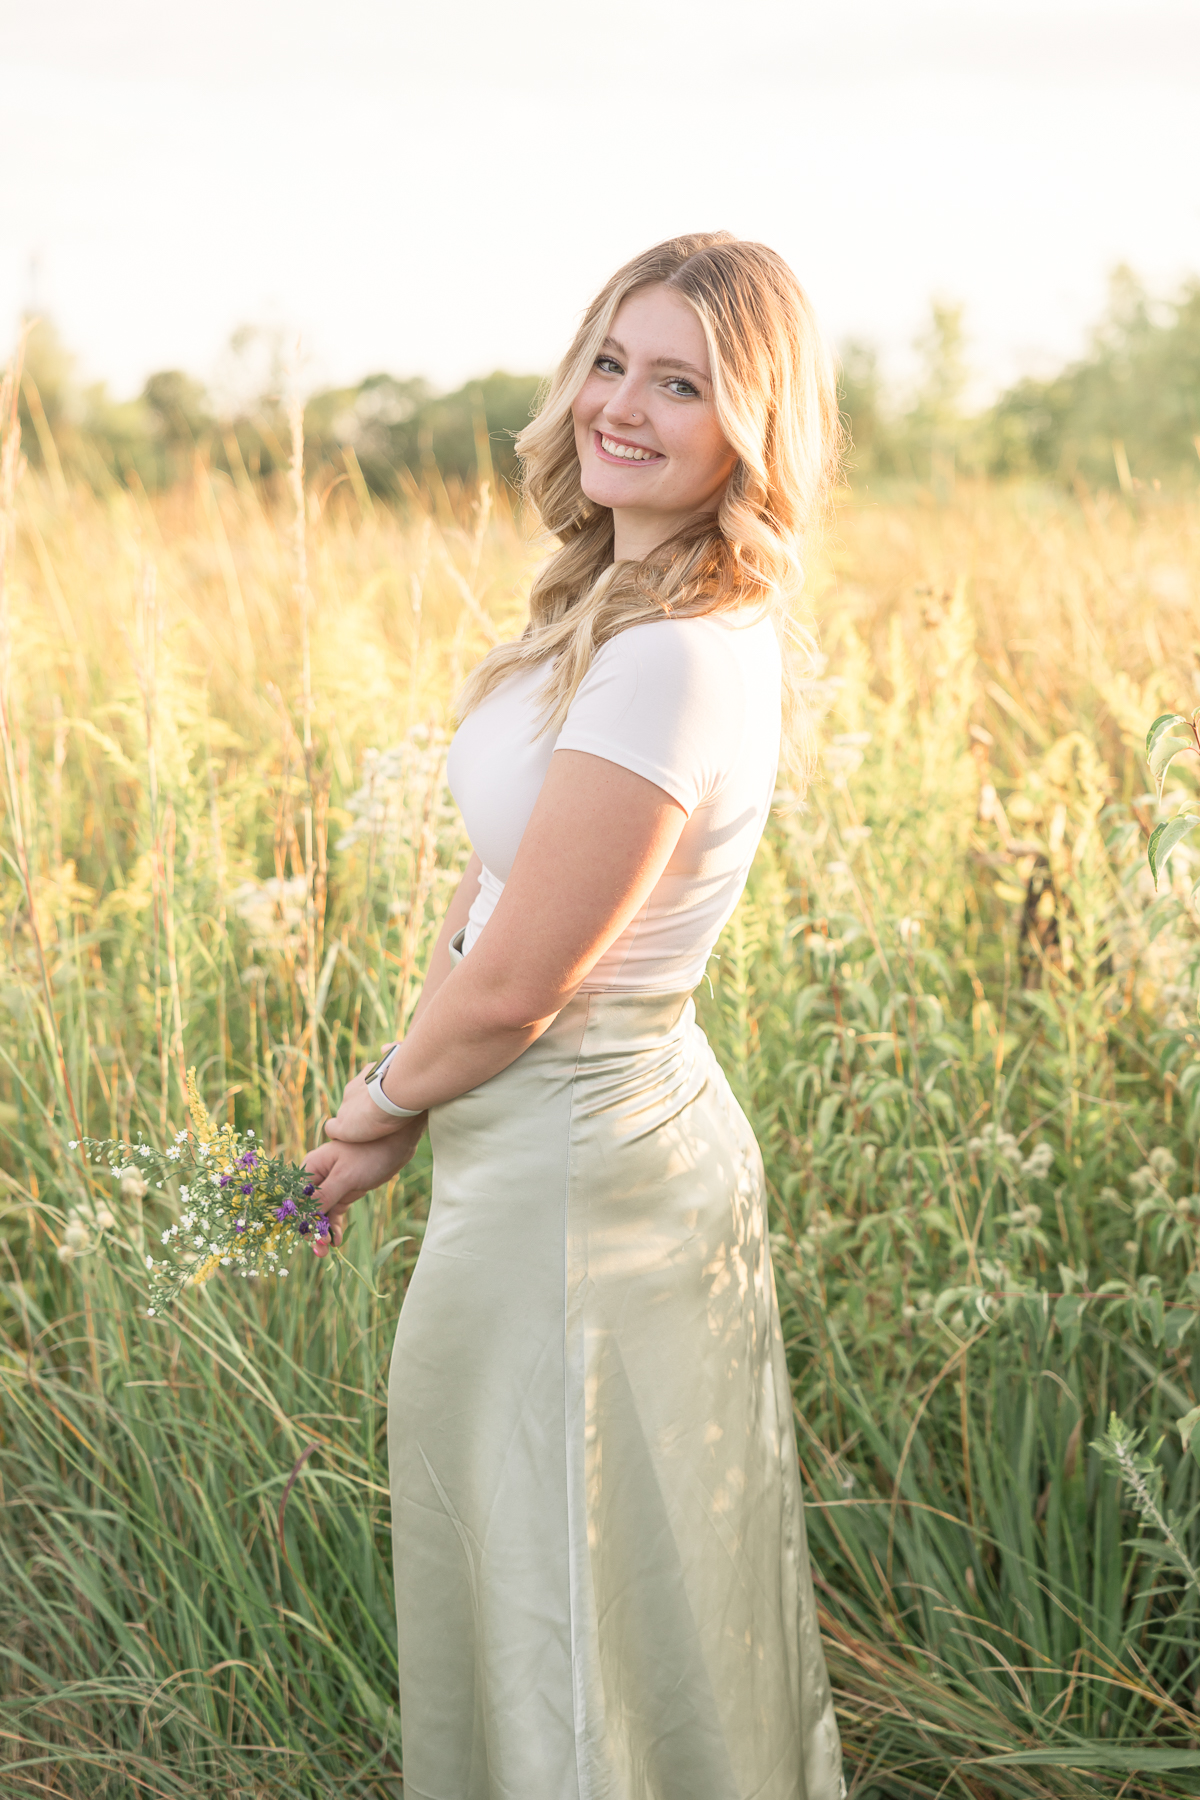 Girl in cream top and green skirt stands in field of summer grass at sunset, carmel senior pictures 